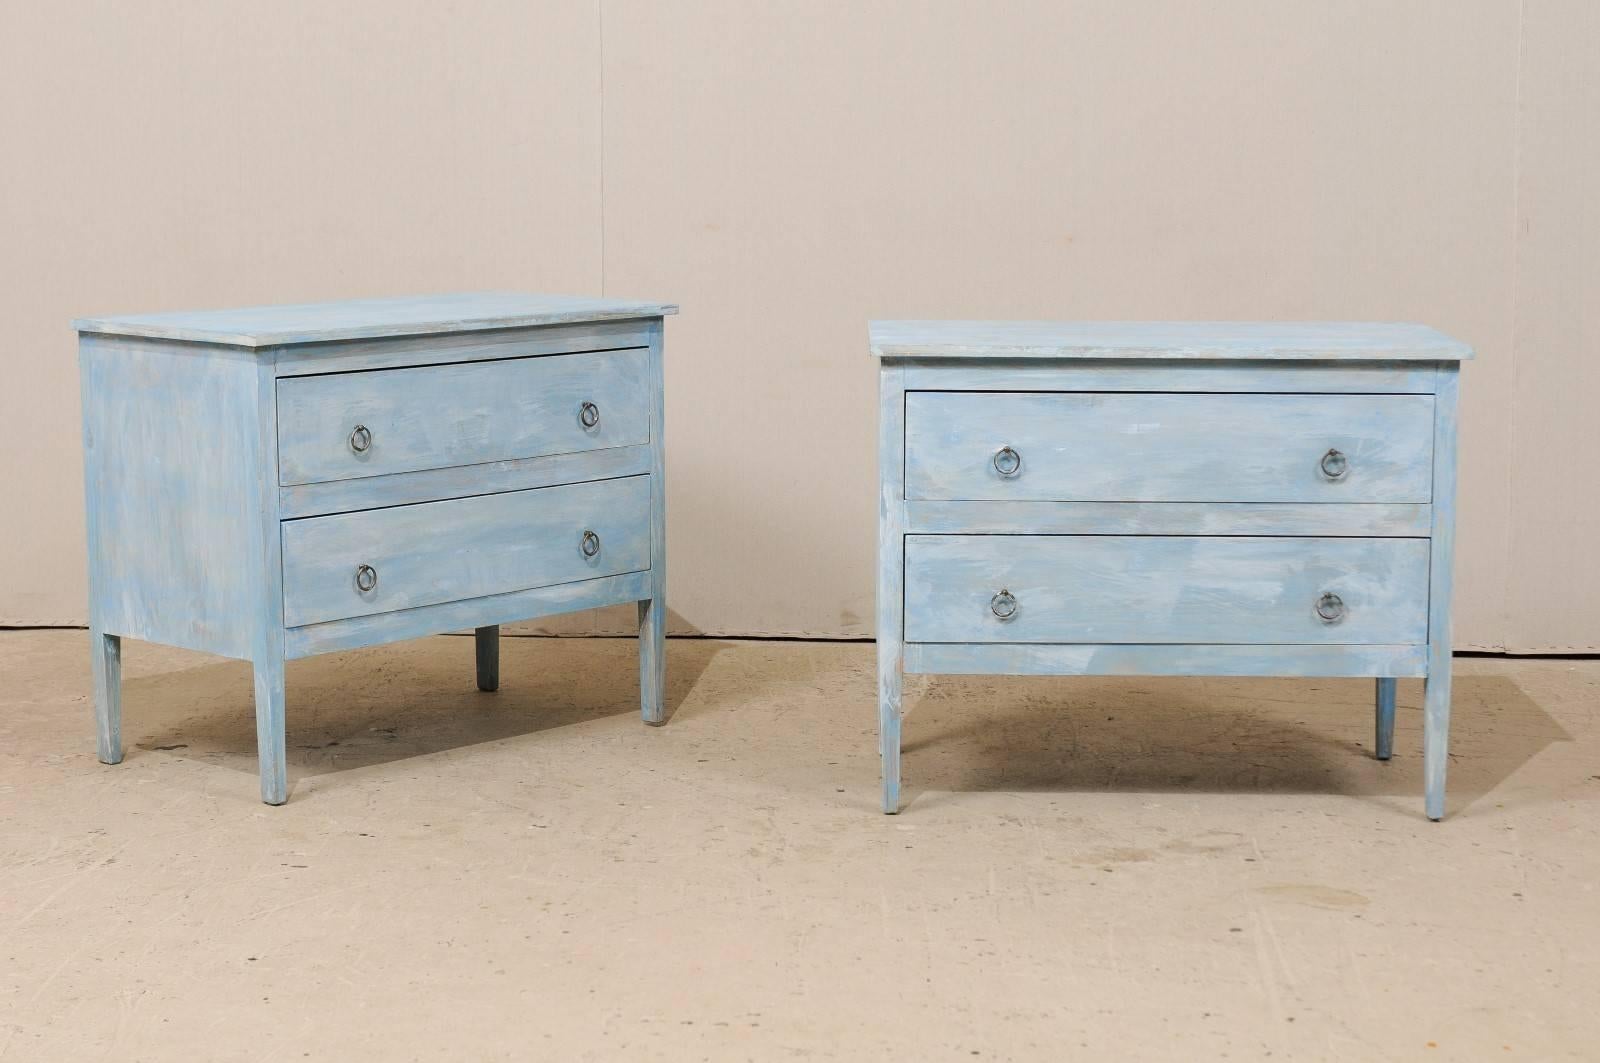 A pair of American painted wood chests. This pair of American two-drawer chests from the 20th century feature nice clean lines and drawers which are minimally ornamented with ring pulls. The chests are raised on slightly tapered legs. This pair of